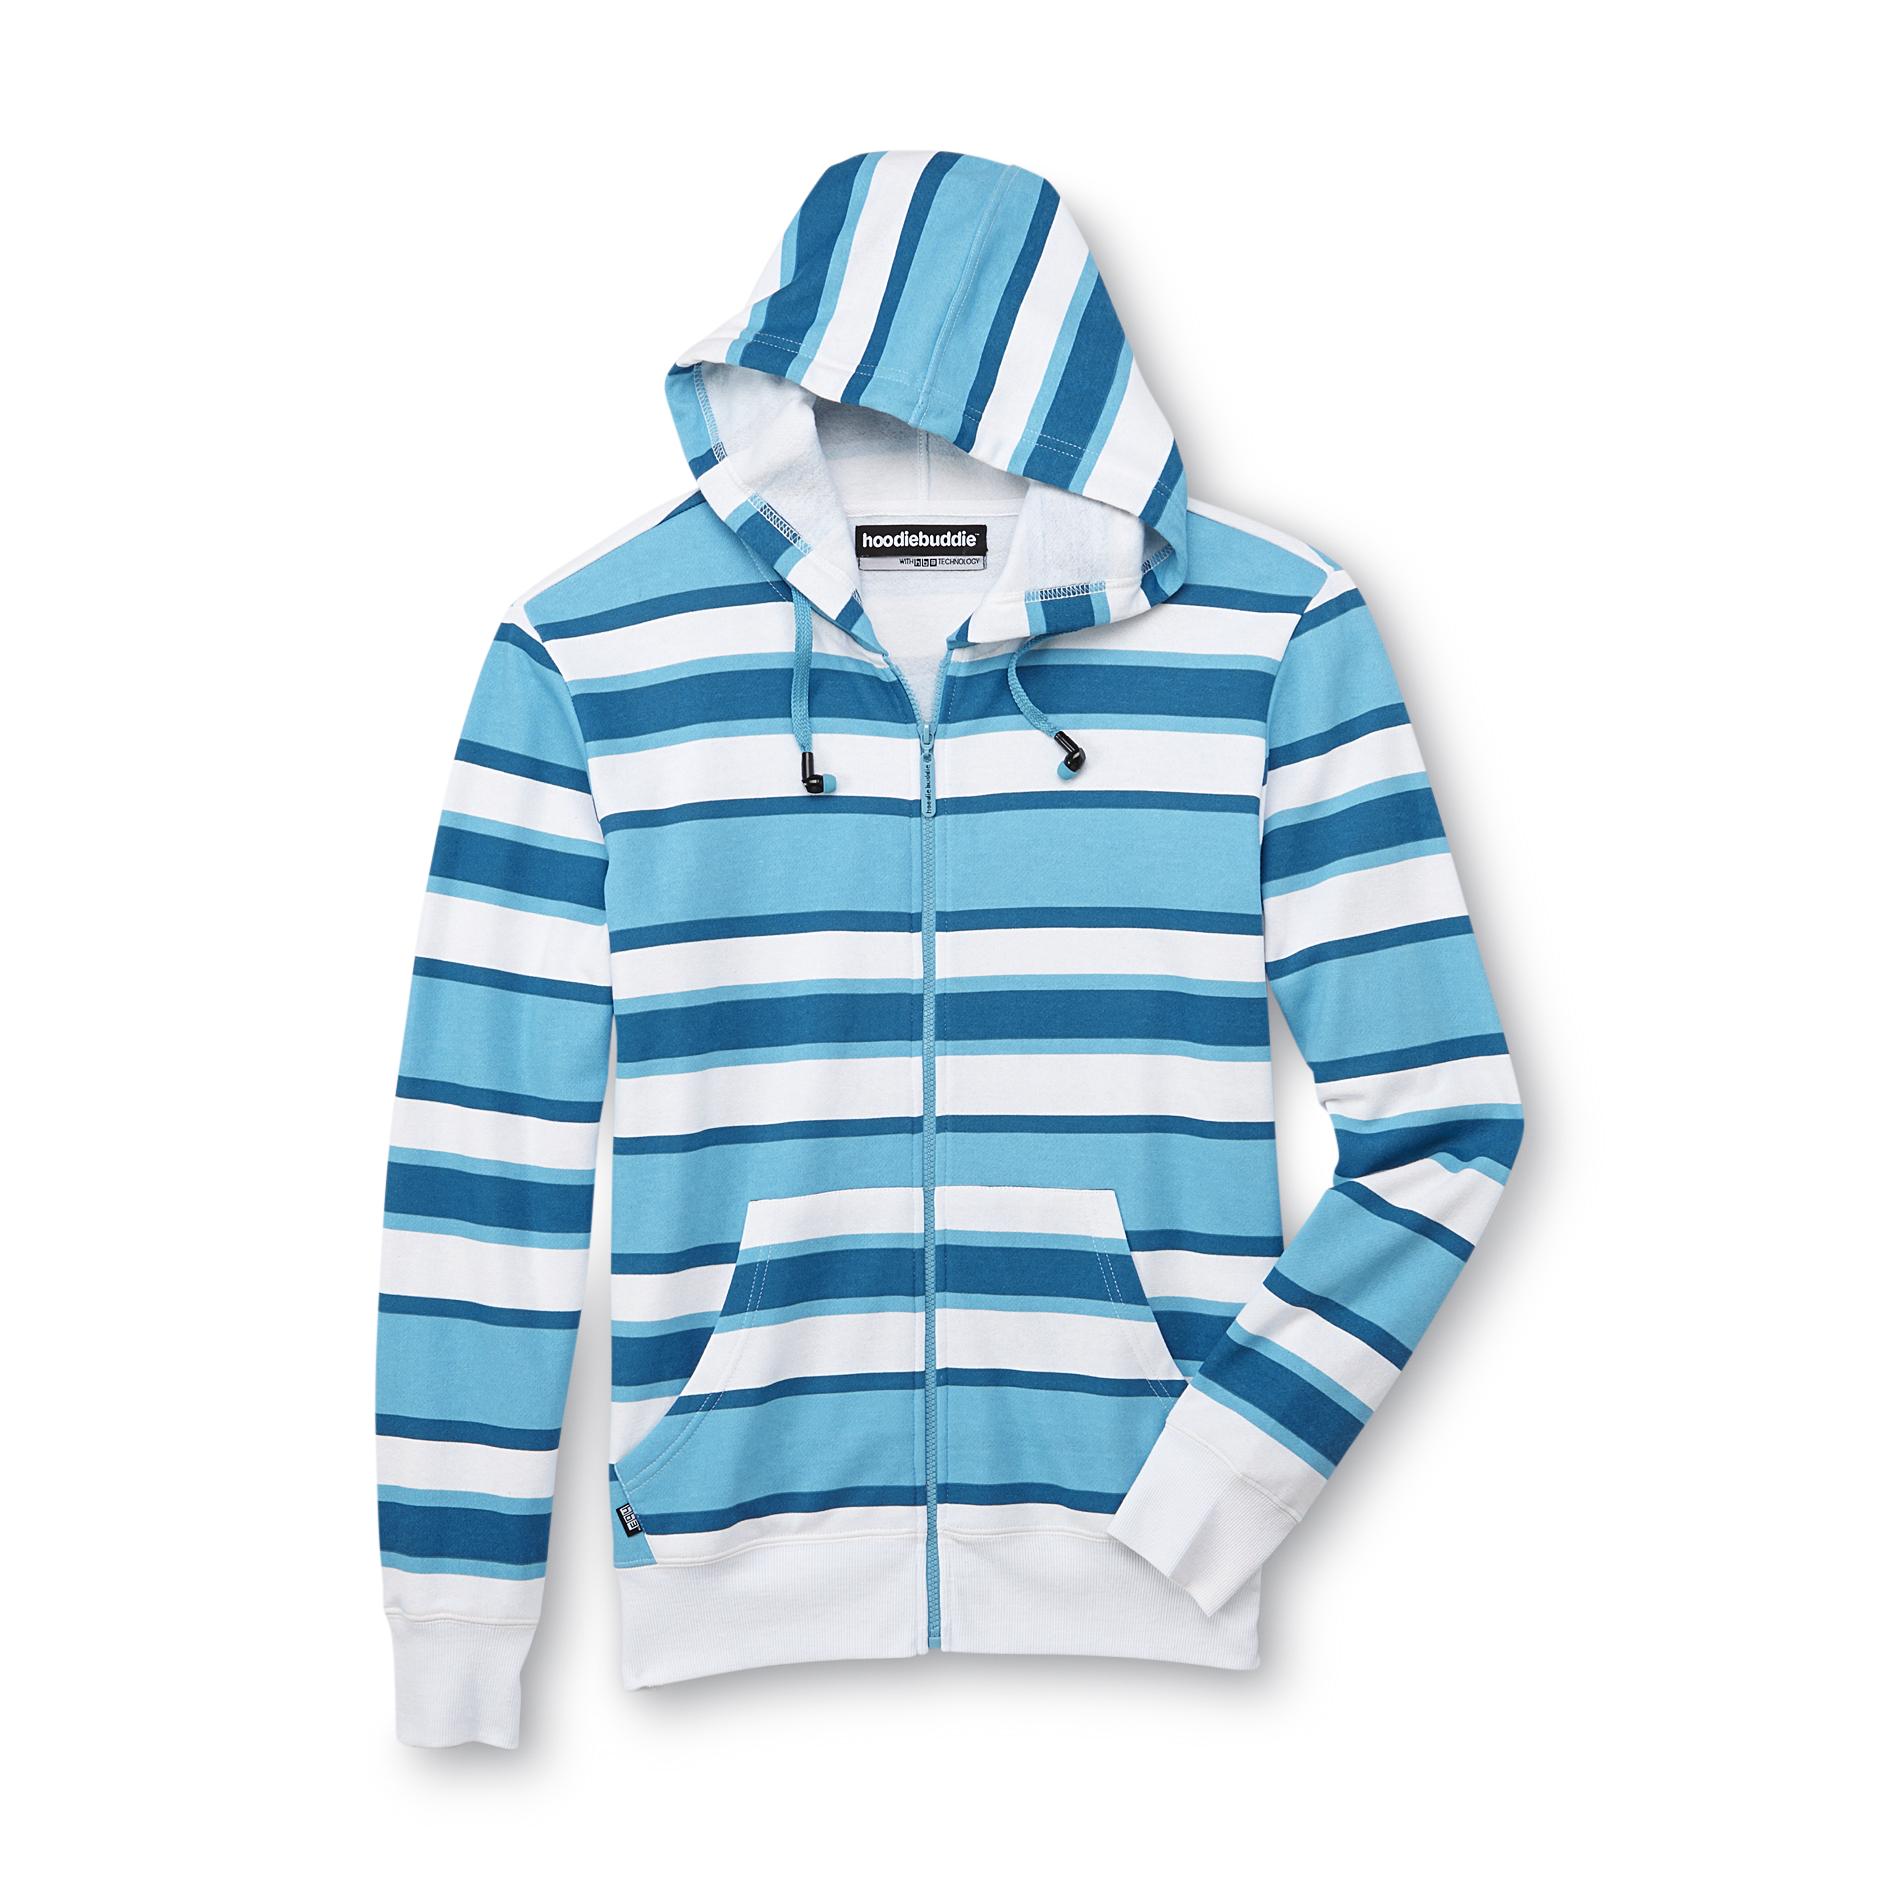 Young Men's Hoodie Jacket & Earbuds - Striped